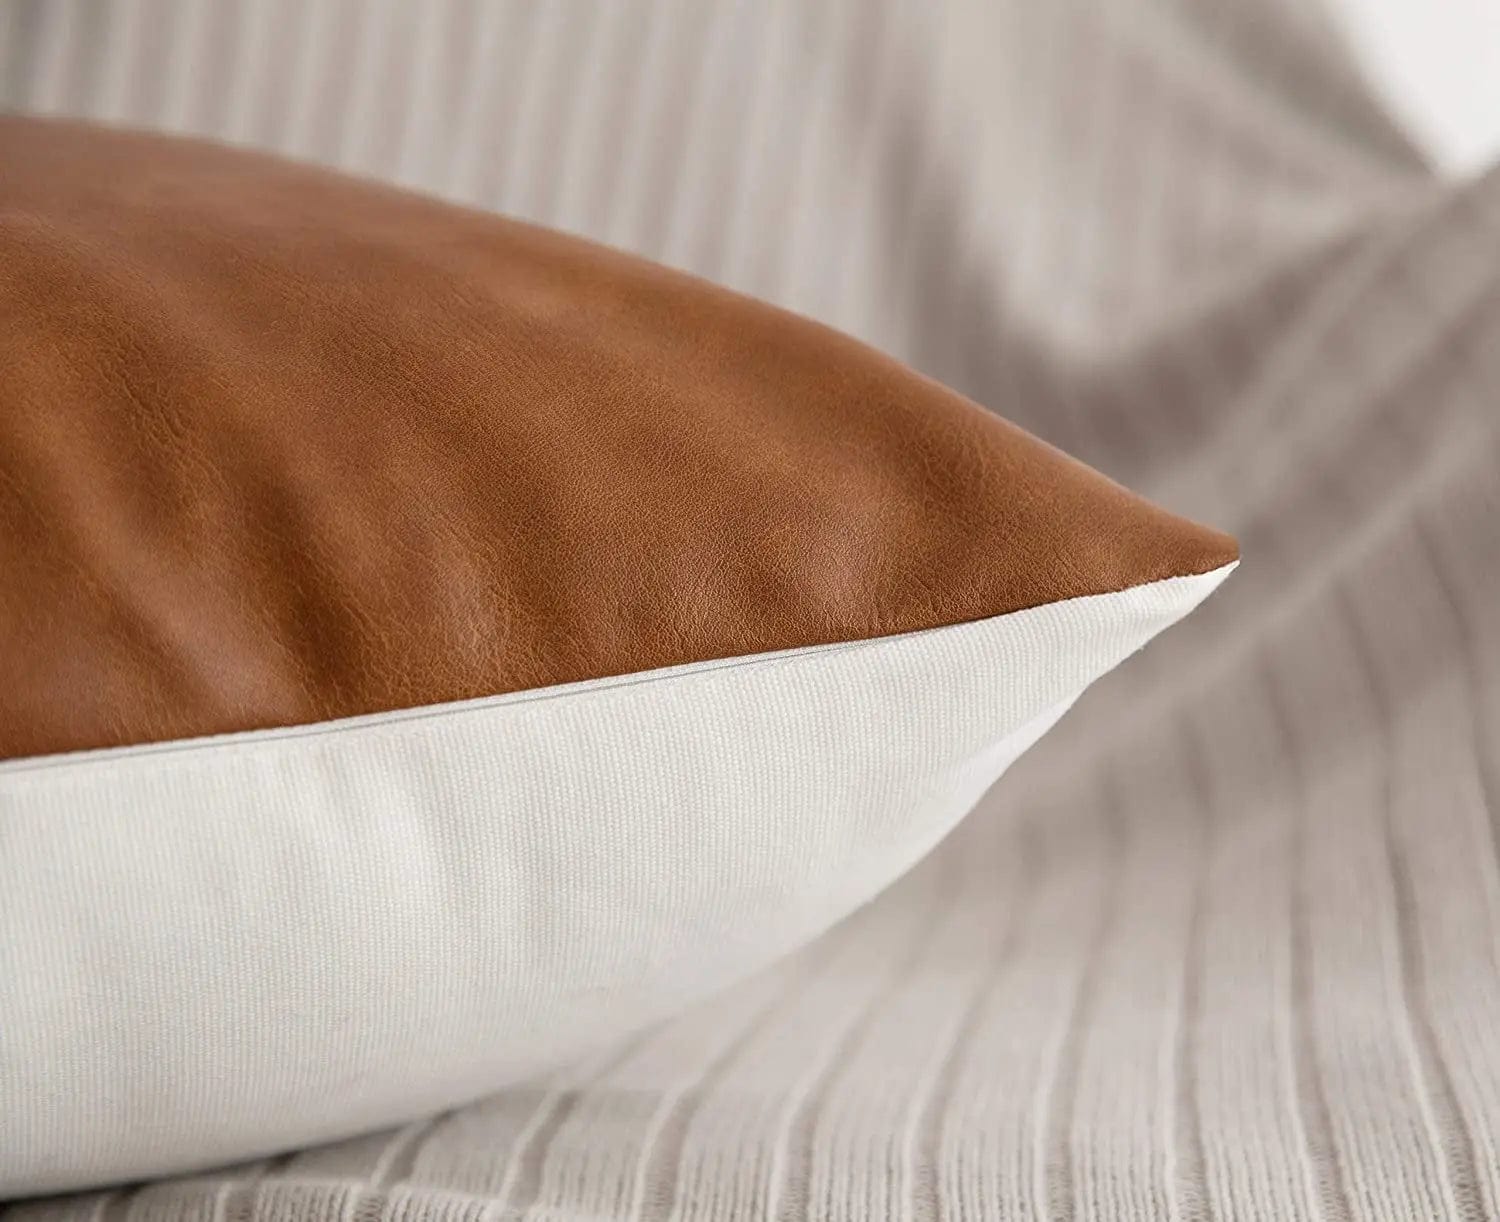 Vegan Leather Pillow Cover Home Decor 30.00 MPGD Corp Merchandise